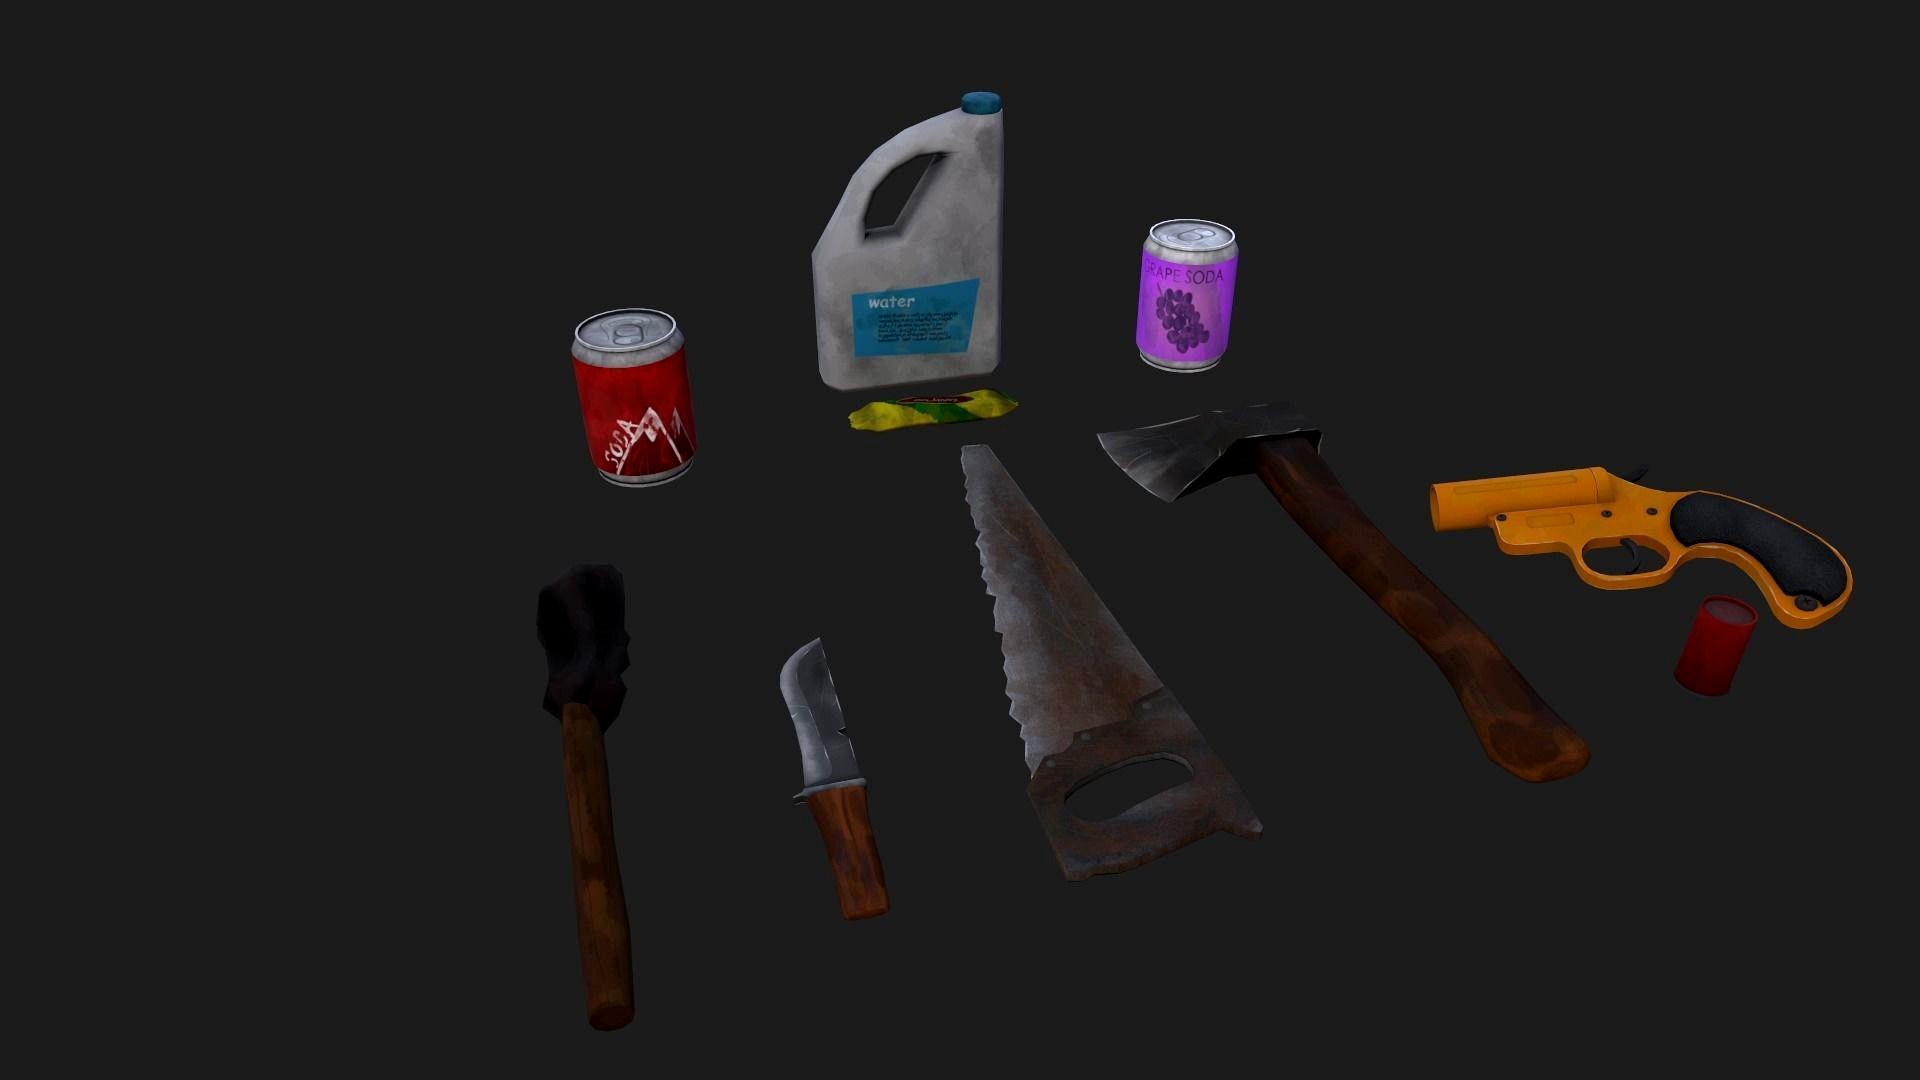 Stylized survival pack